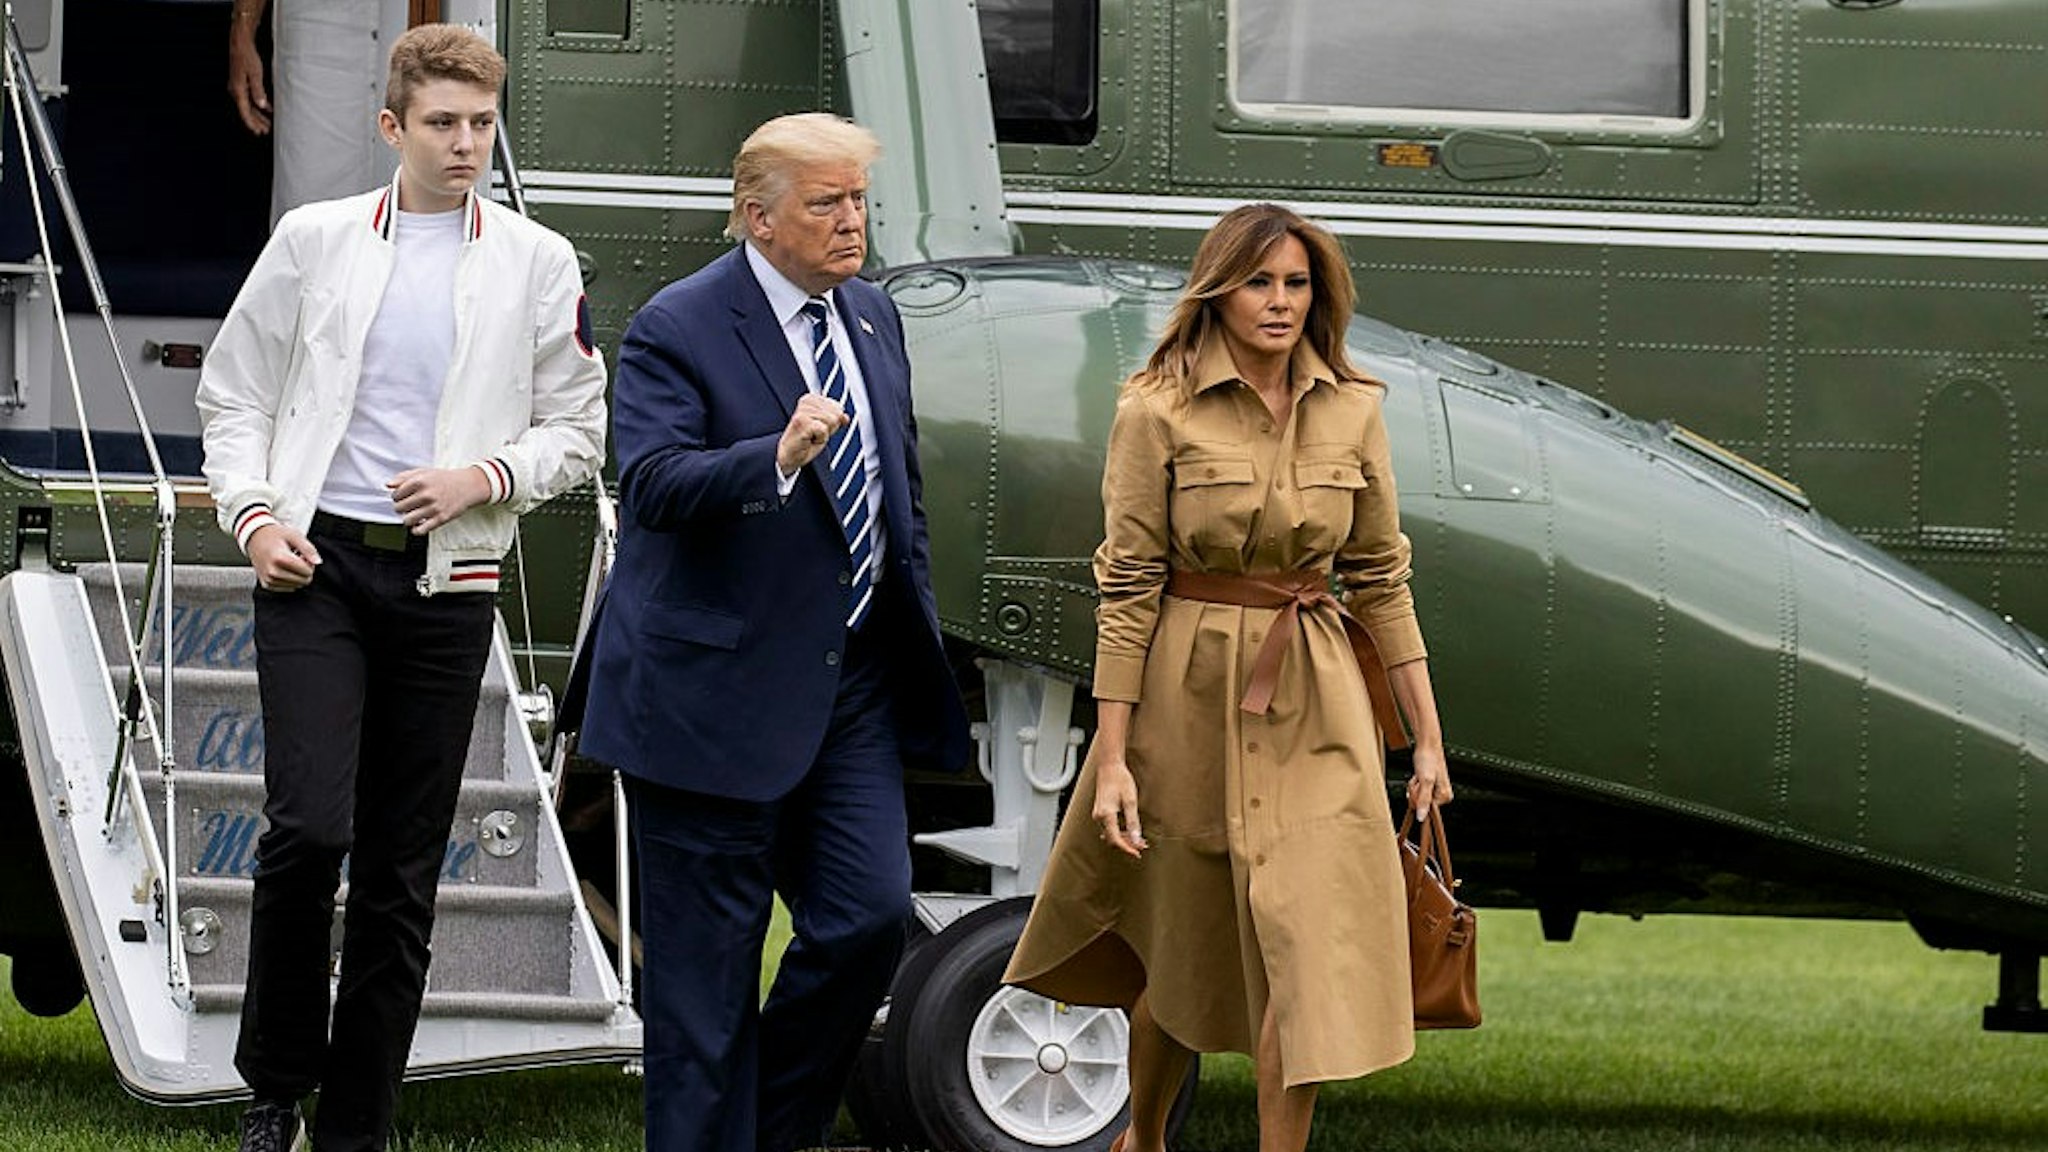 WASHINGTON, DC - AUGUST 16: Barron Trump, US President Donald Trump and First lady Melania Trump walk on the South Lawn of the White House on August 16, 2020 in Washington, DC. Robert Trump, 71, the younger brother of the president, died Saturday in Manhattan. (Photo by